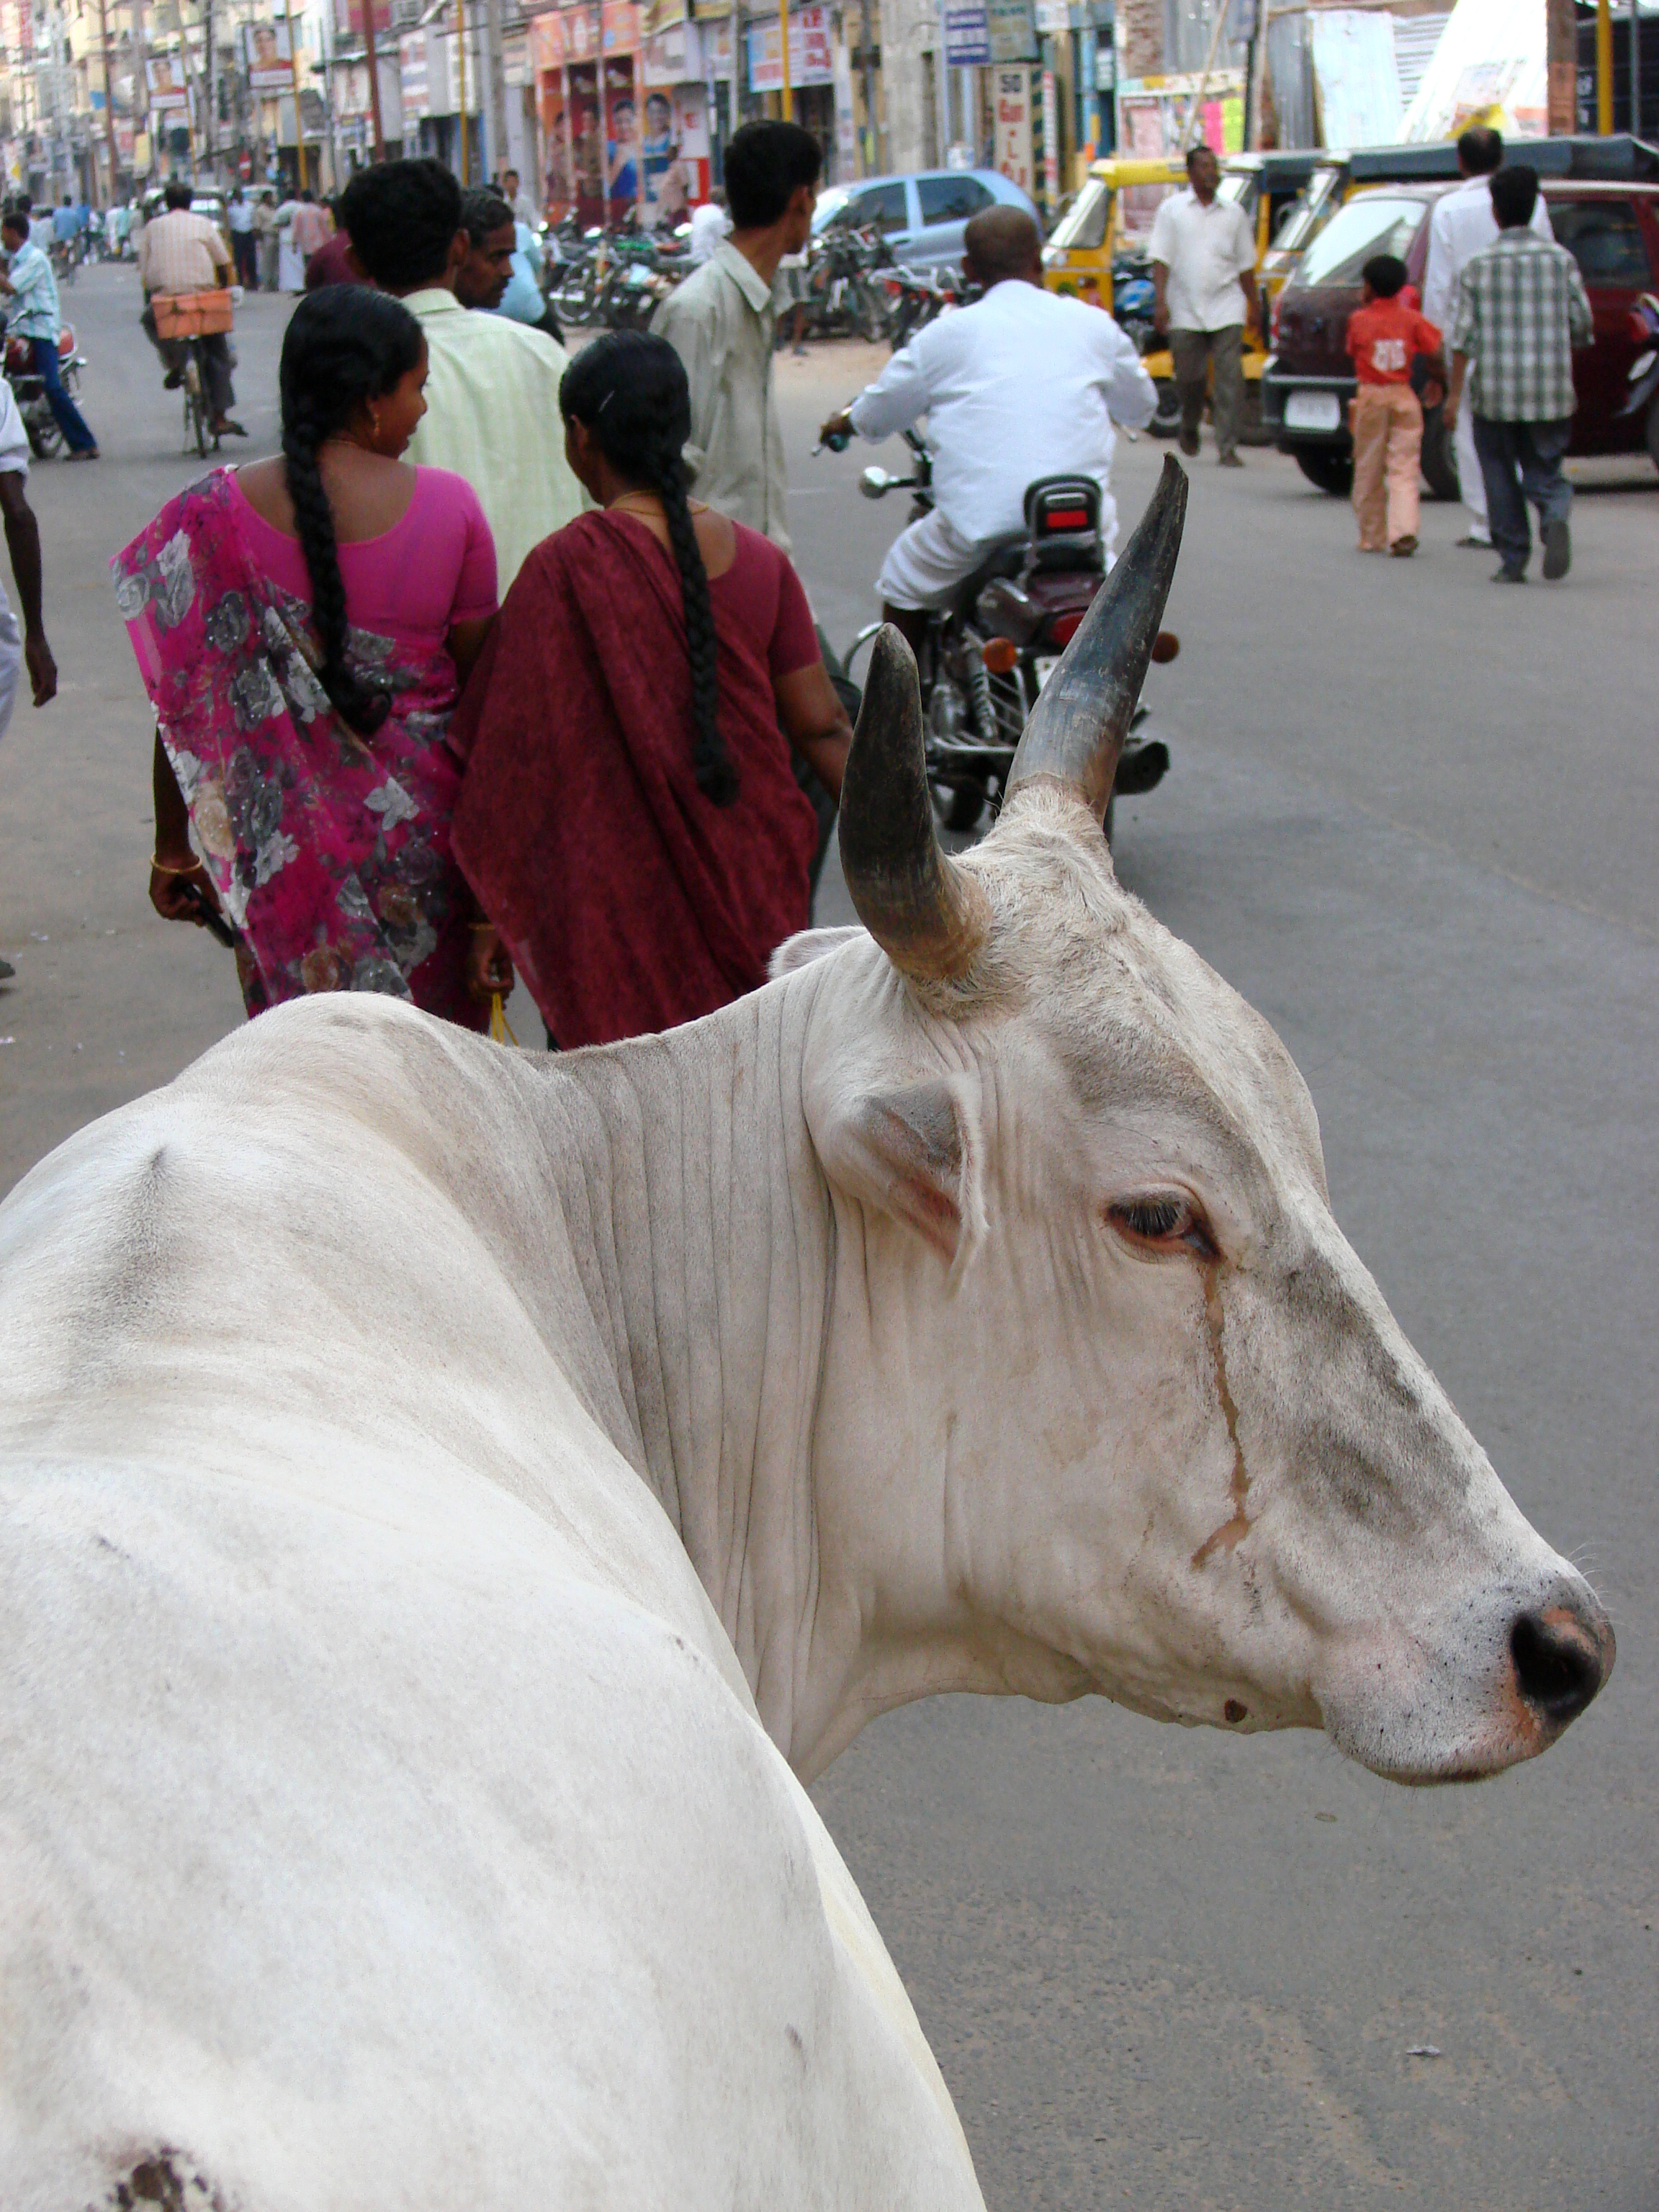 Cows From India